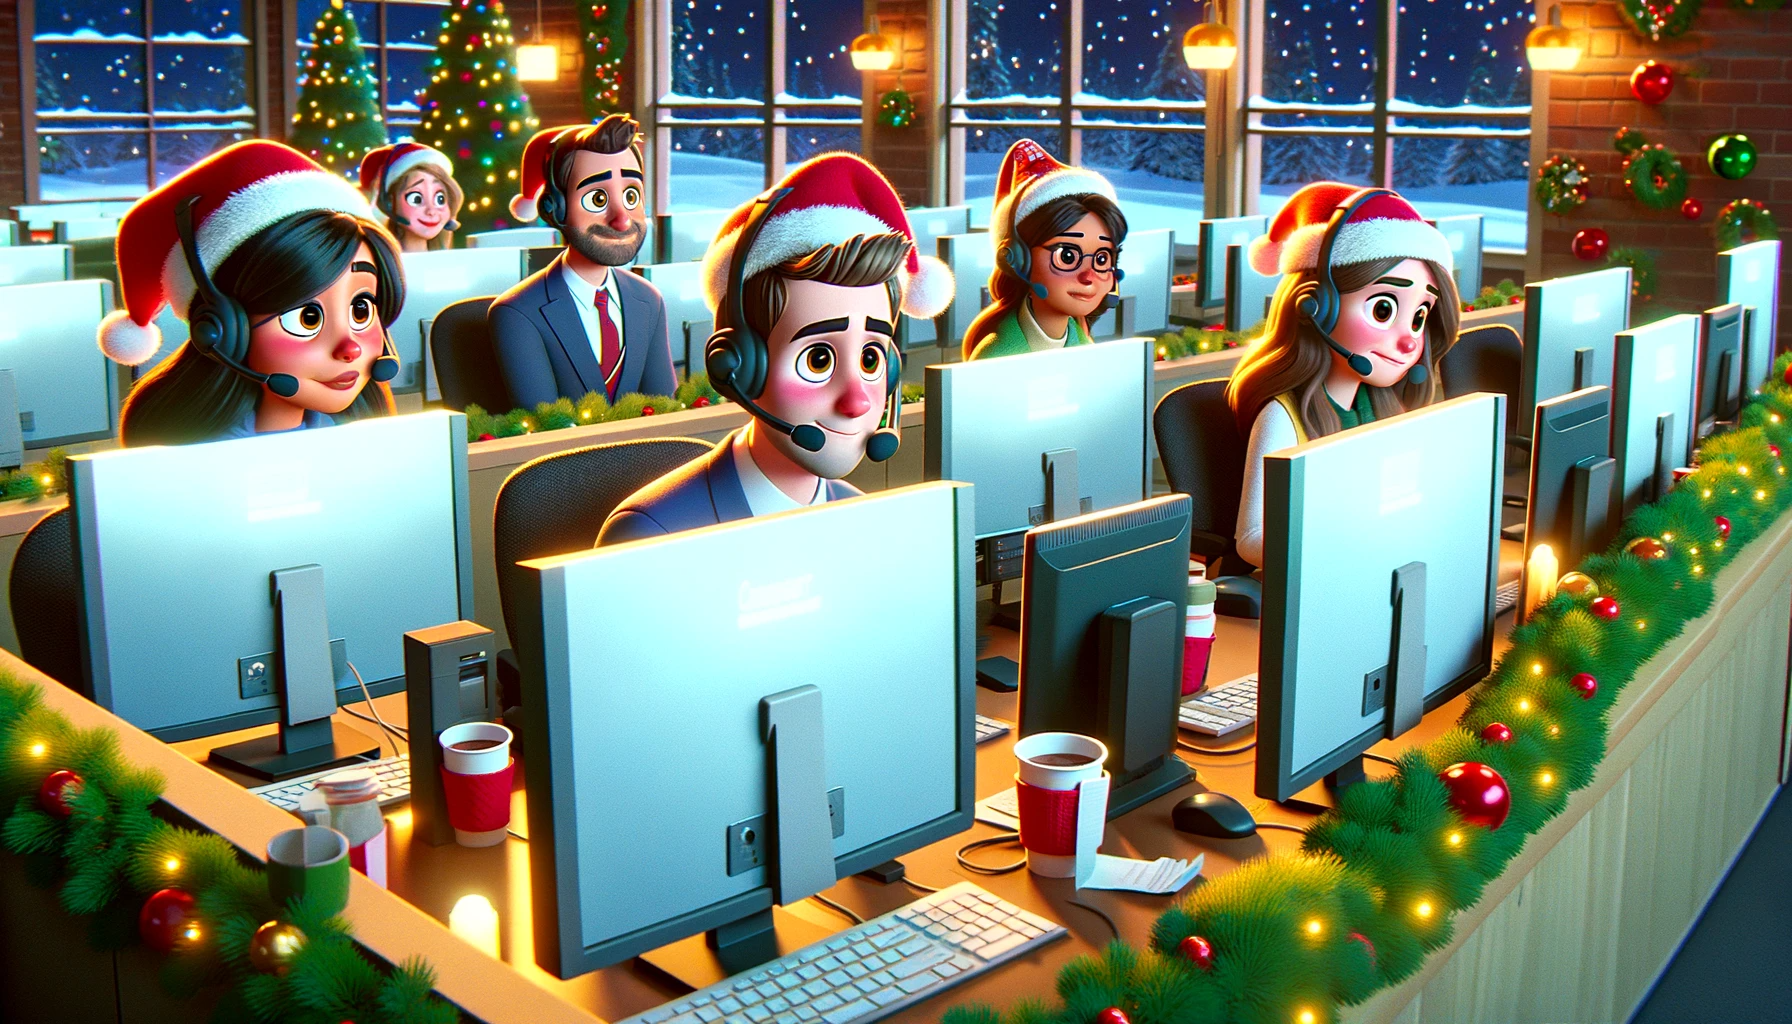 Pixar-style-animation-of-a-group-of-customer-support-representatives-sitting-by-computers-in-a-festive-holiday-themed-setting.-A-few-are-wearing-Chris.png